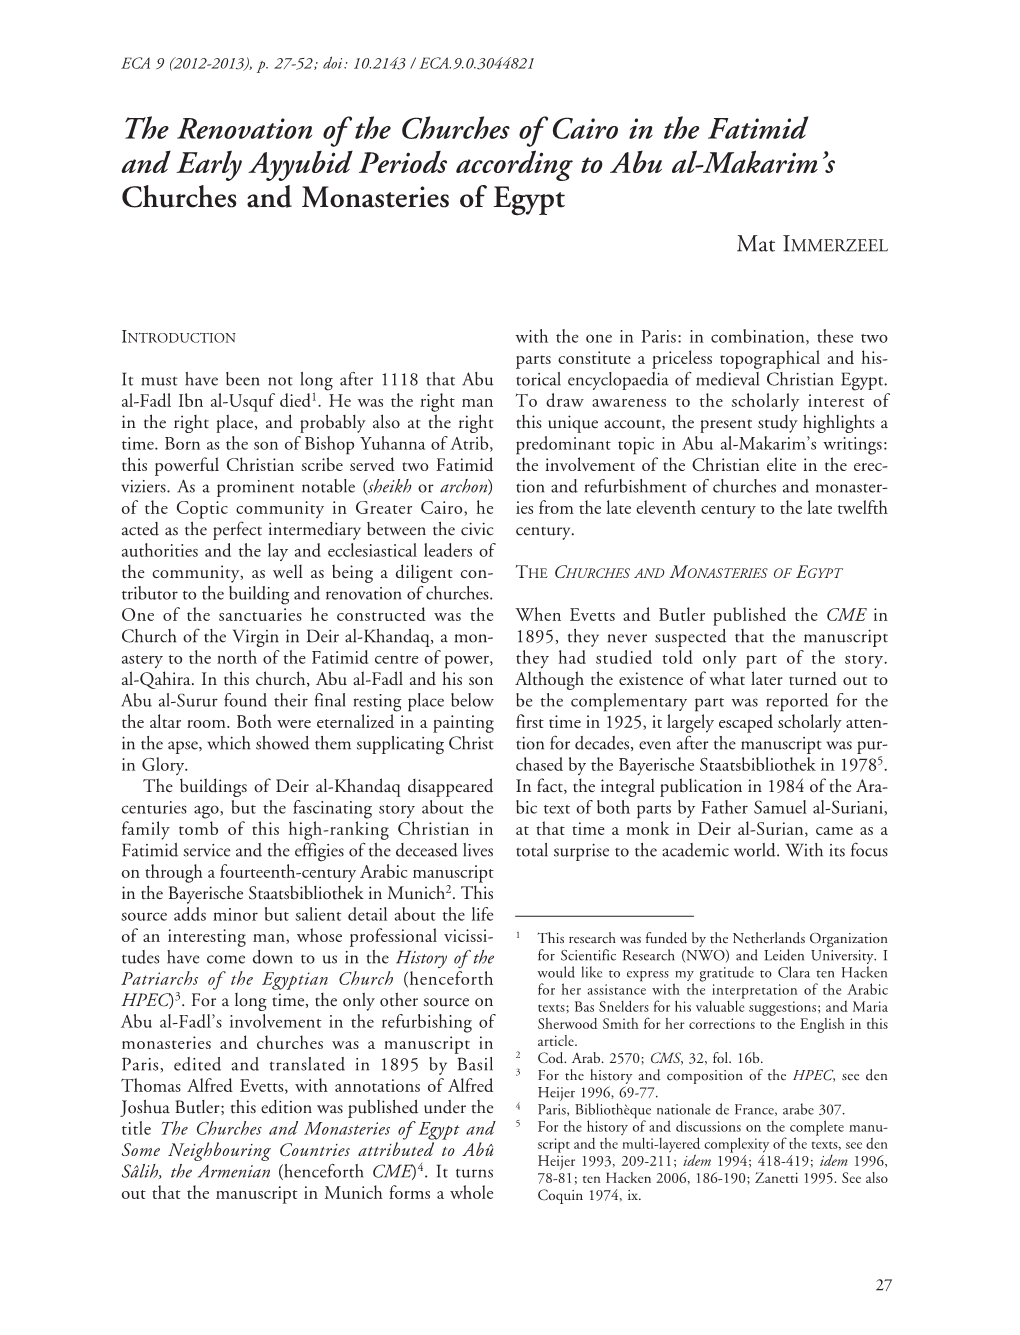 The Renovation of the Churches of Cairo in the Fatimid and Early Ayyubid Periods According to Abu Al-Makarim’S Churches and Monasteries of Egypt